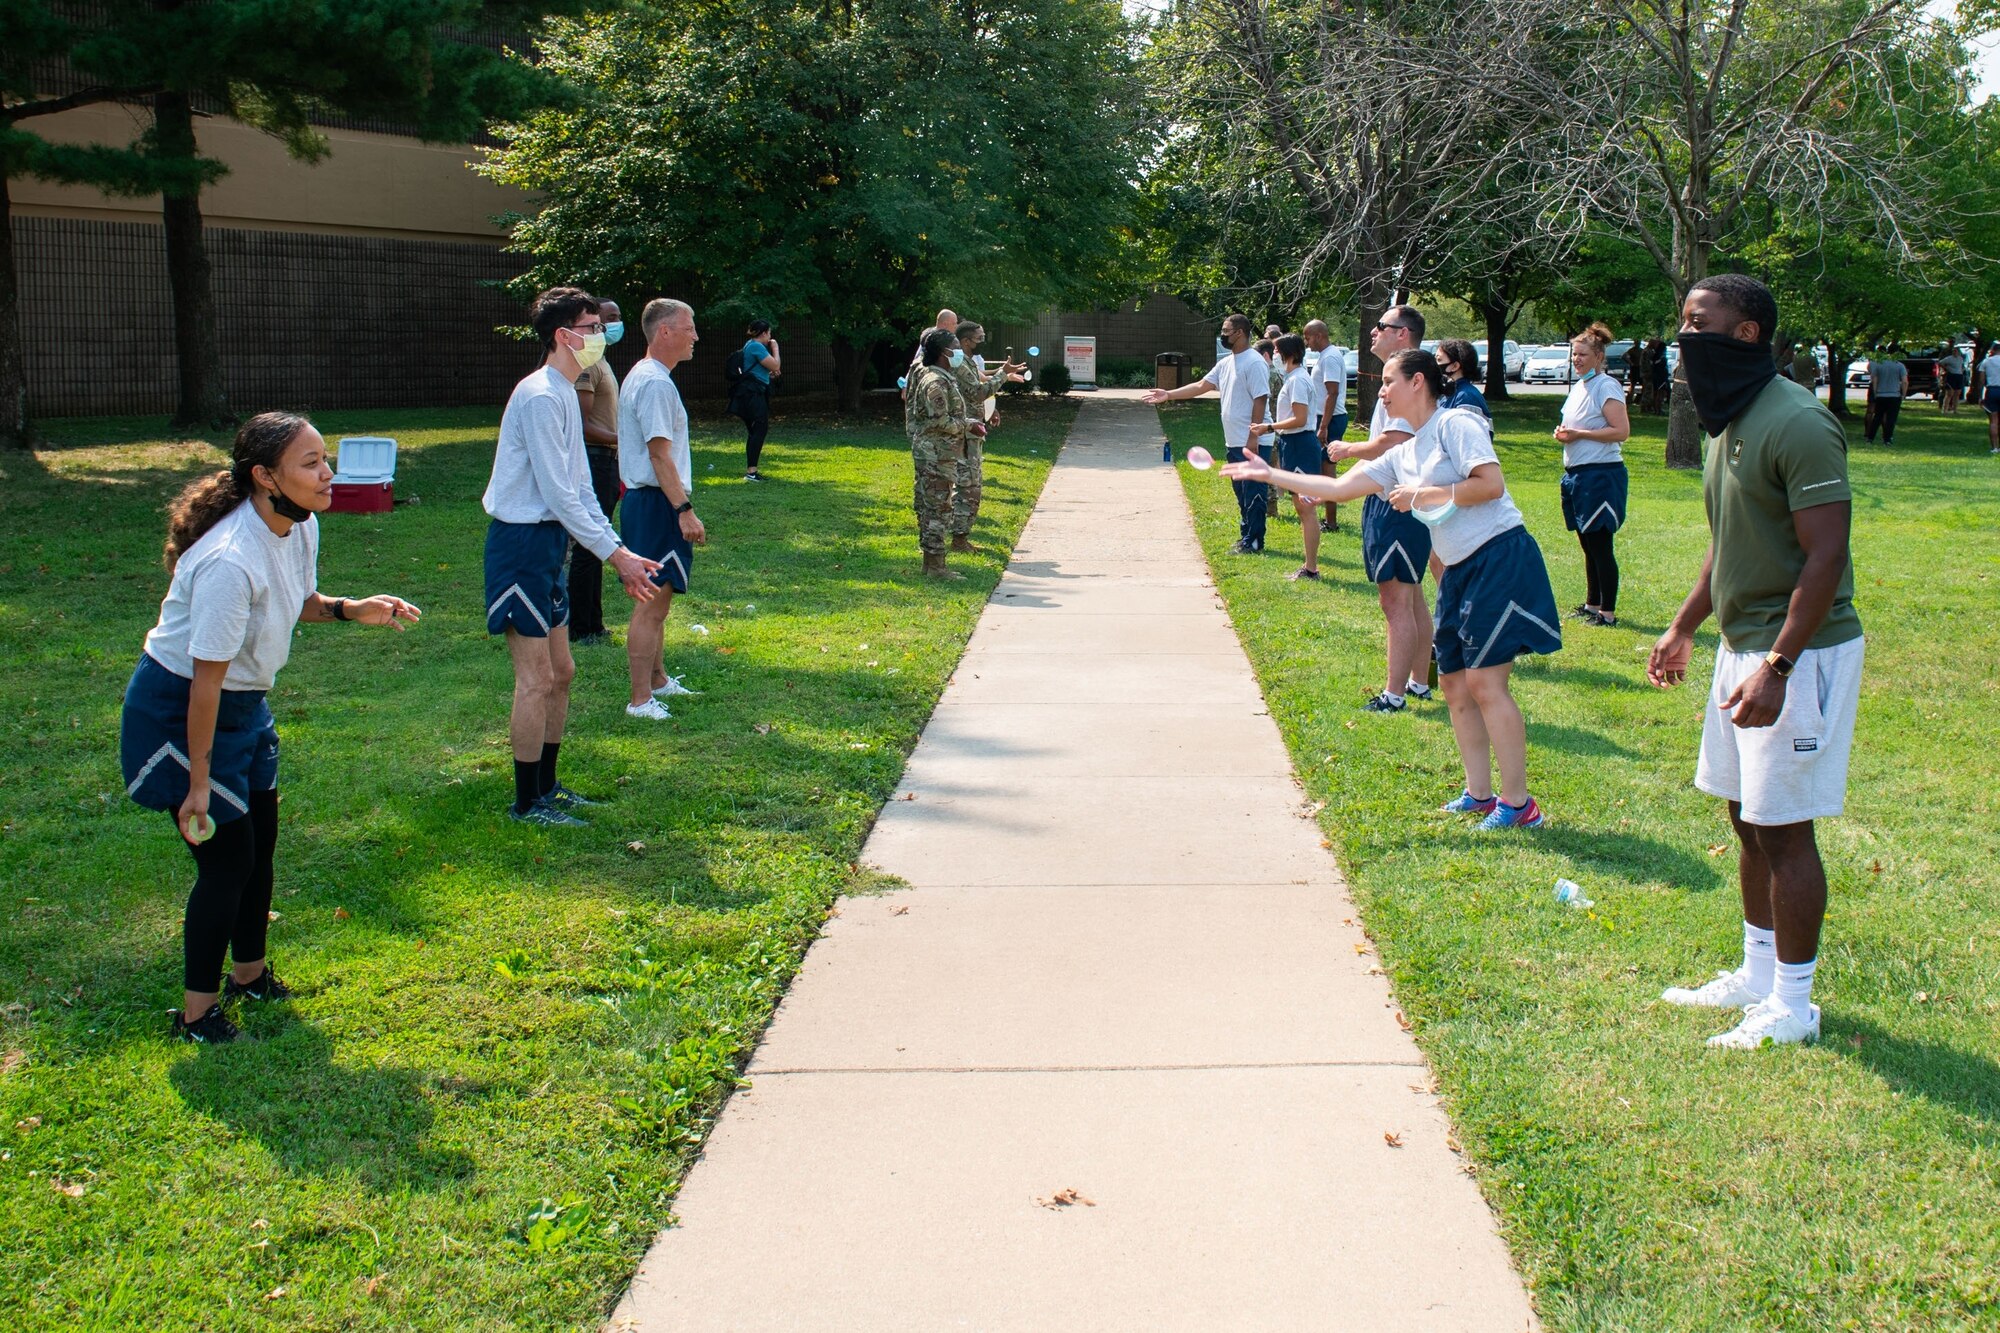 Members of the 932nd Medical Group participate in the water balloon toss activity during their annual sexual assault prevention and response/suicide prevention training, Scott Air Force Base, Illinois, Sept. 12, 2021. Each activity reviewed the training material, for example during the fit to fight activity a team of airman would be asked a training question and if answered correctly all other groups would do an exercise. (U.S. Air Force Photo by Staff Sgt. Brooke Spenner)